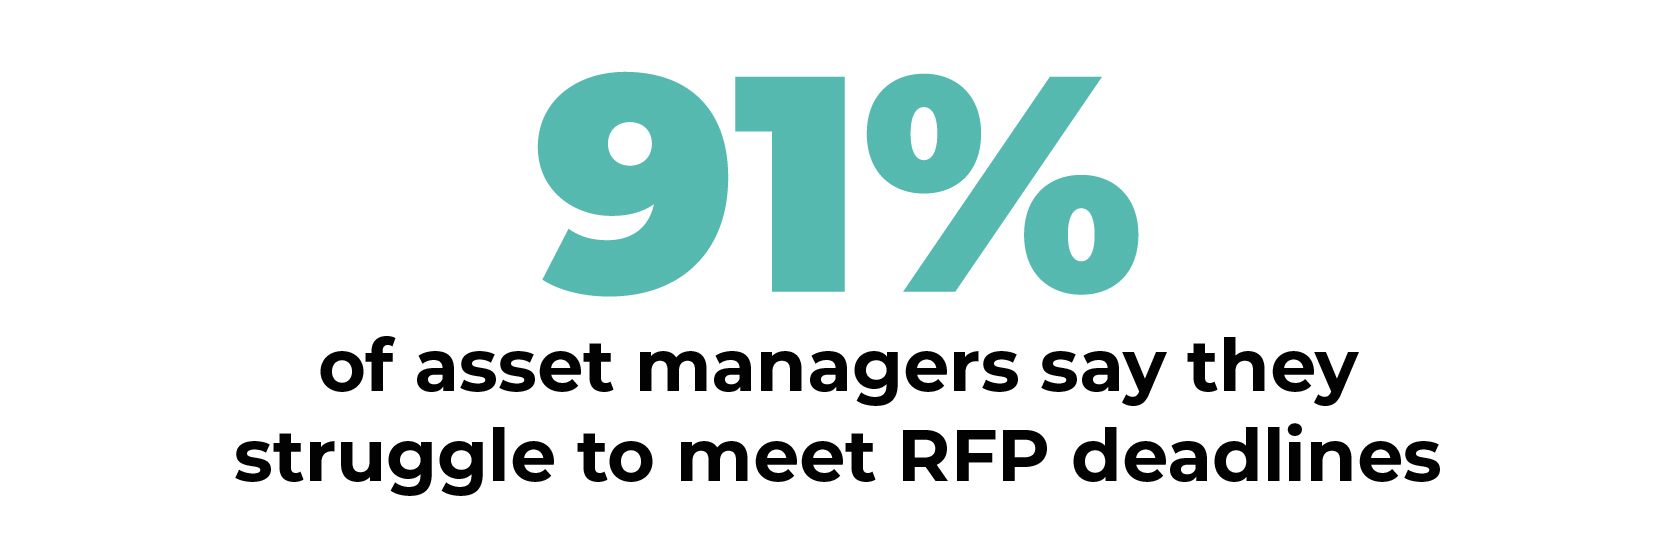 Statistics about asset managers using investment management RFPs